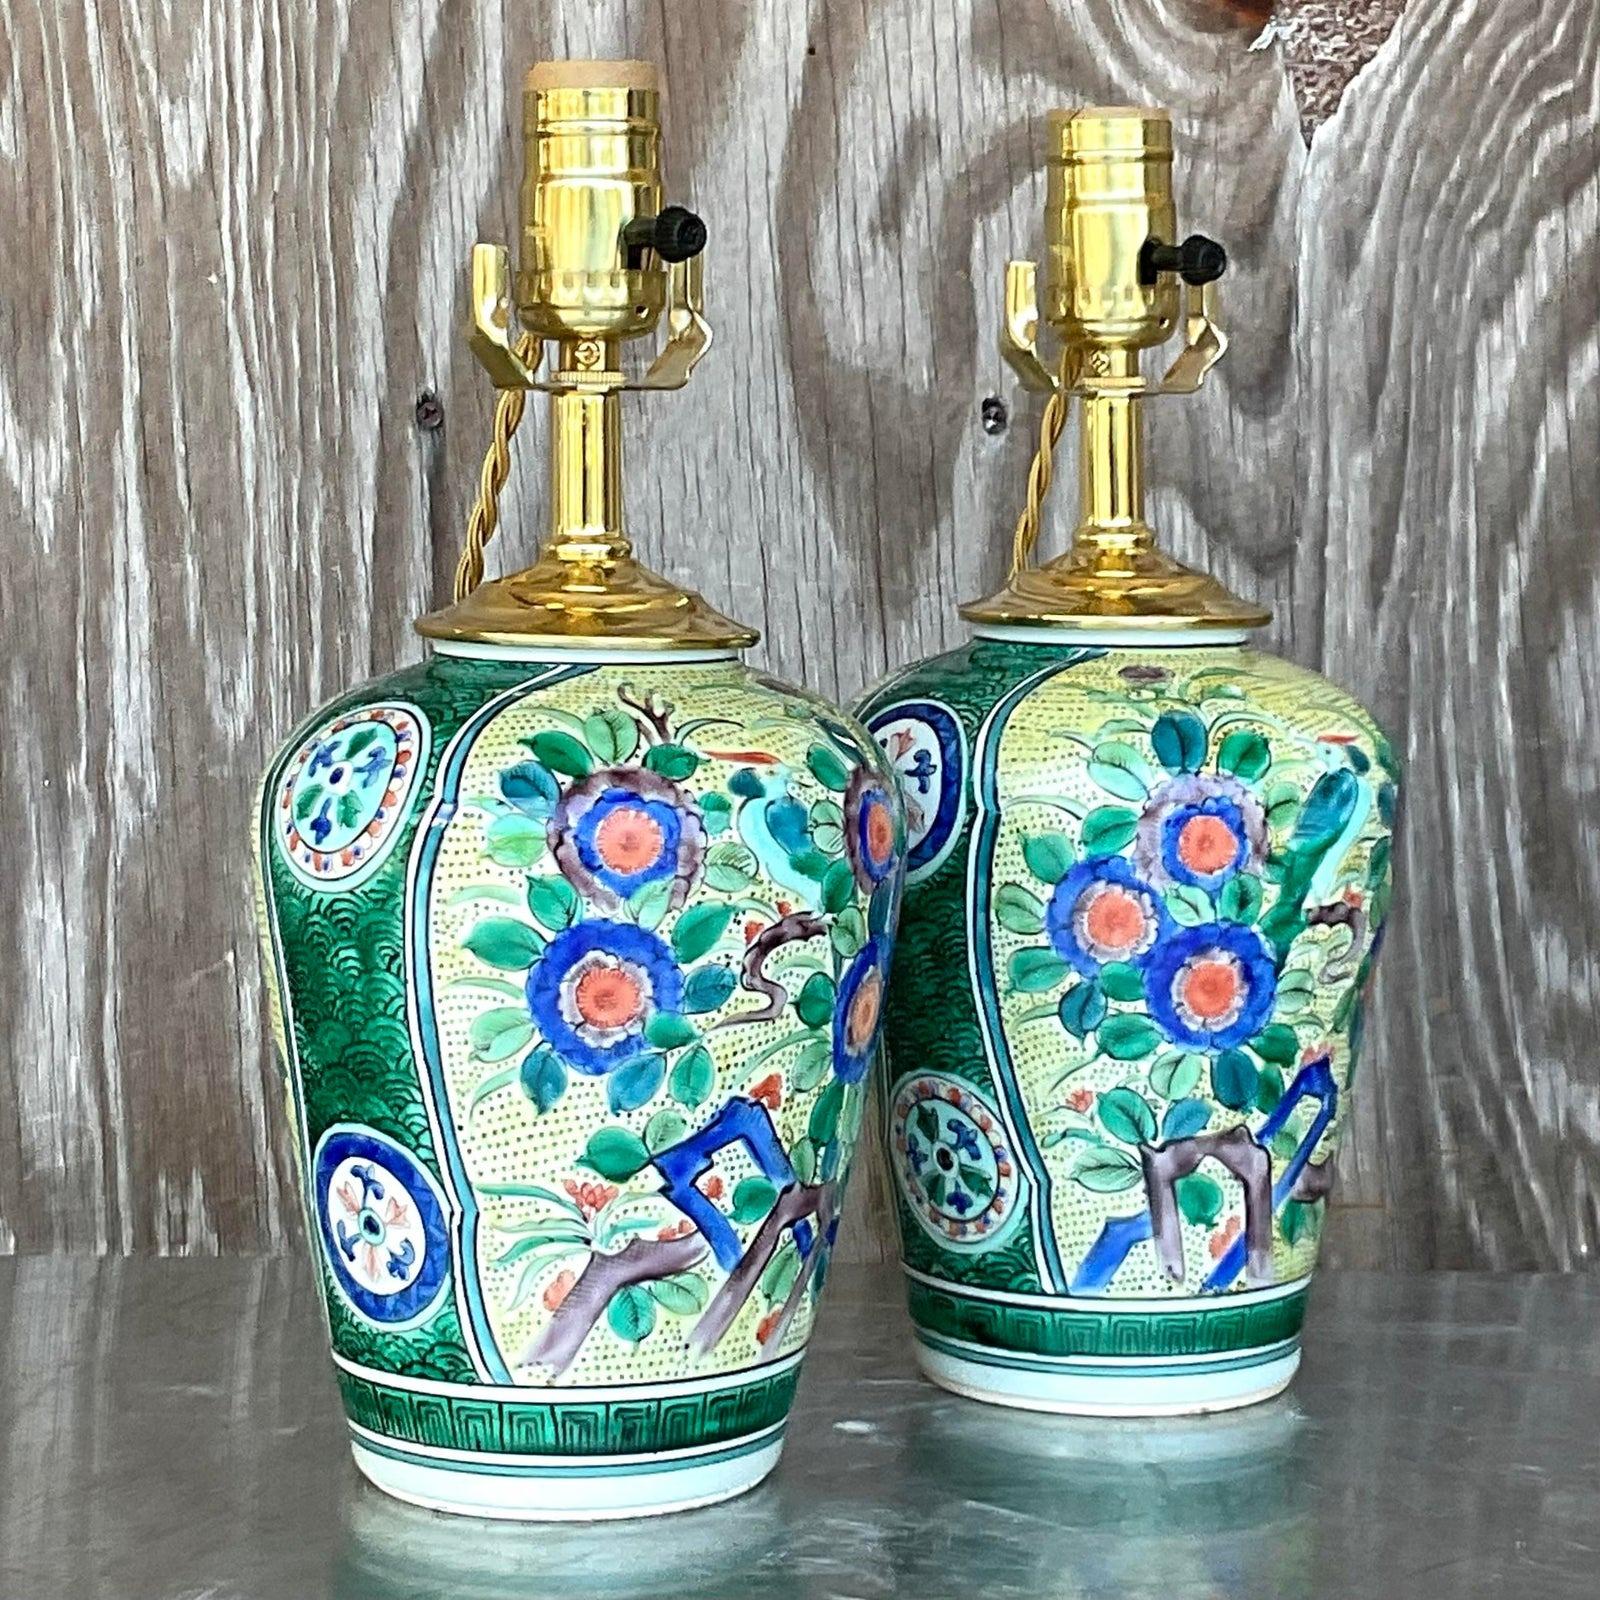 Vintage Asian Glazed Ceramic Floral Table Lamps - a Pair For Sale 1